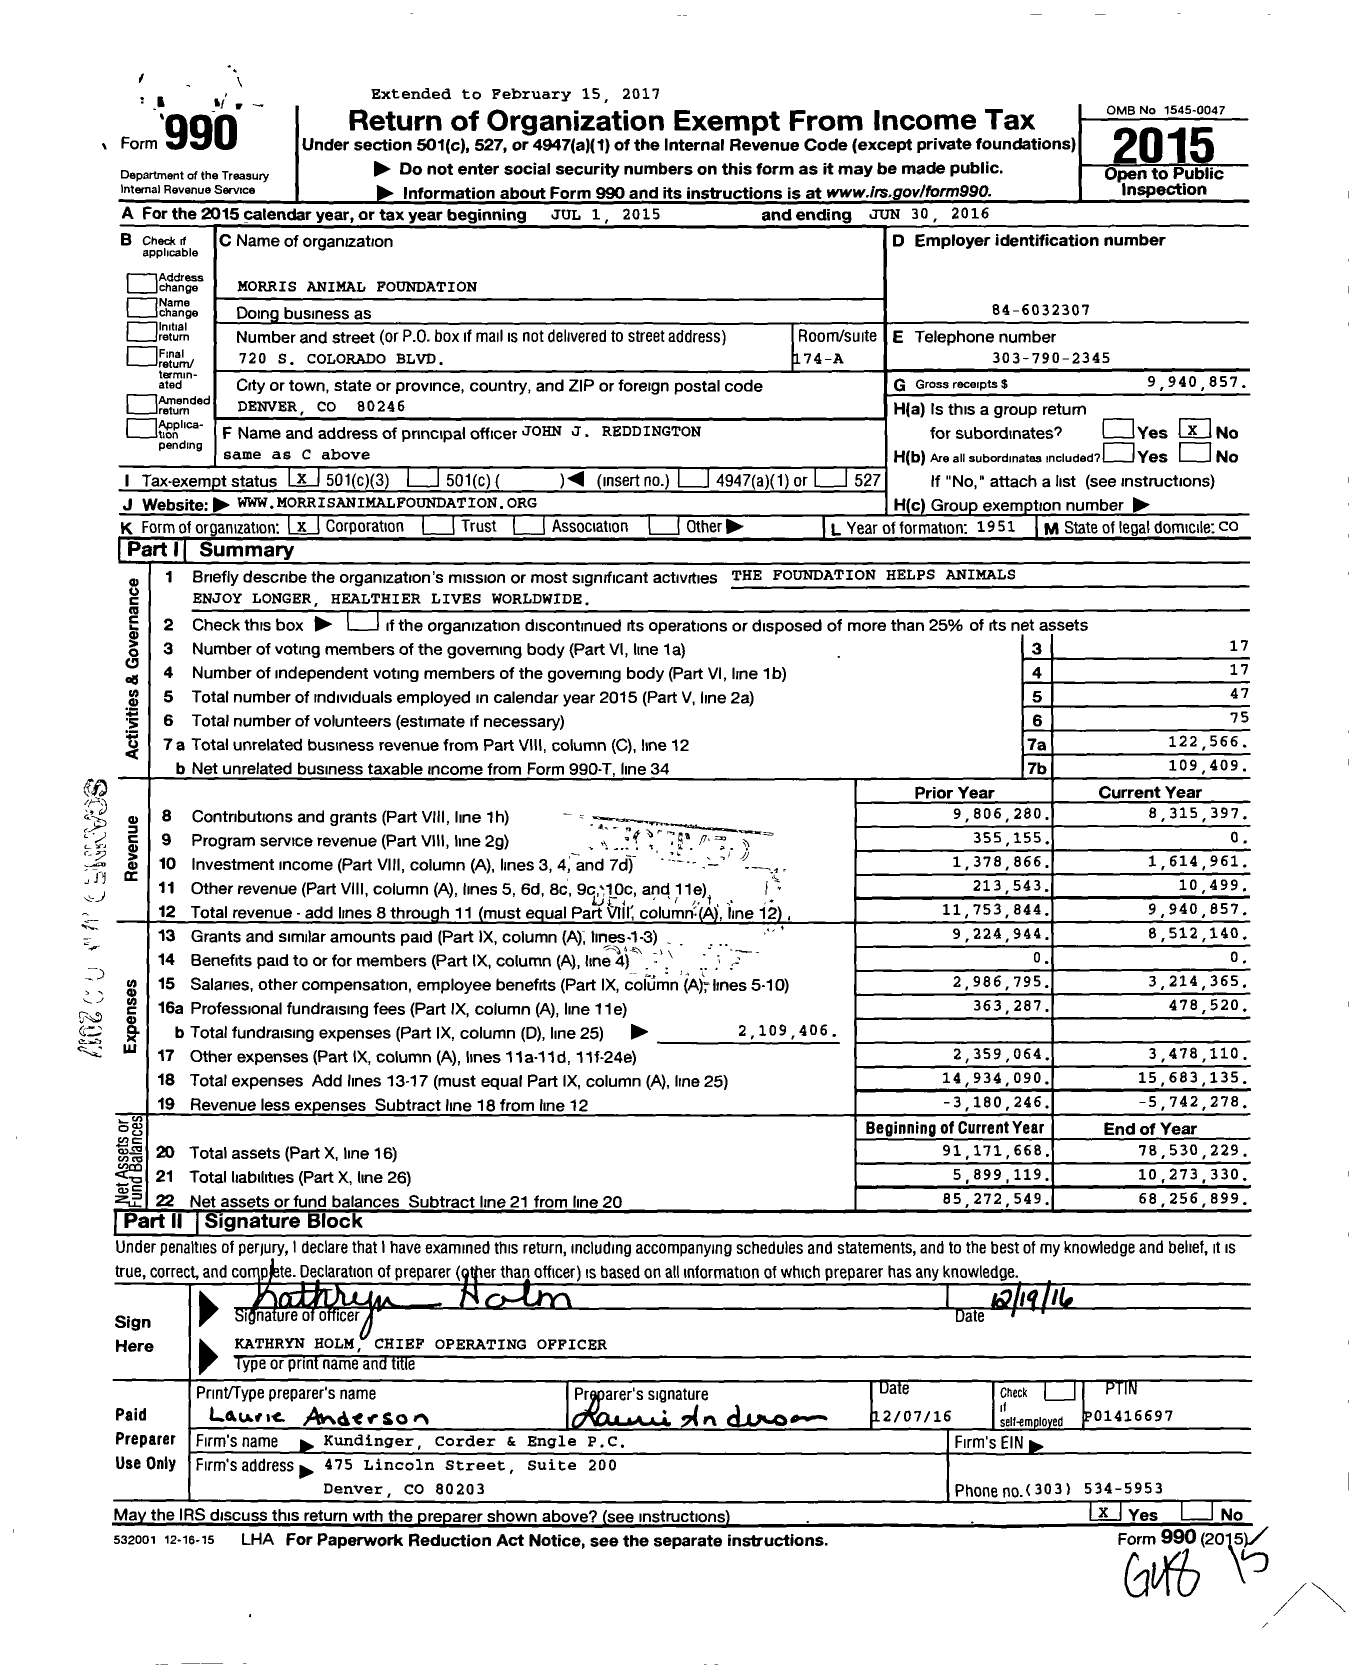 Image of first page of 2015 Form 990 for Morris Animal Foundation (MAF)